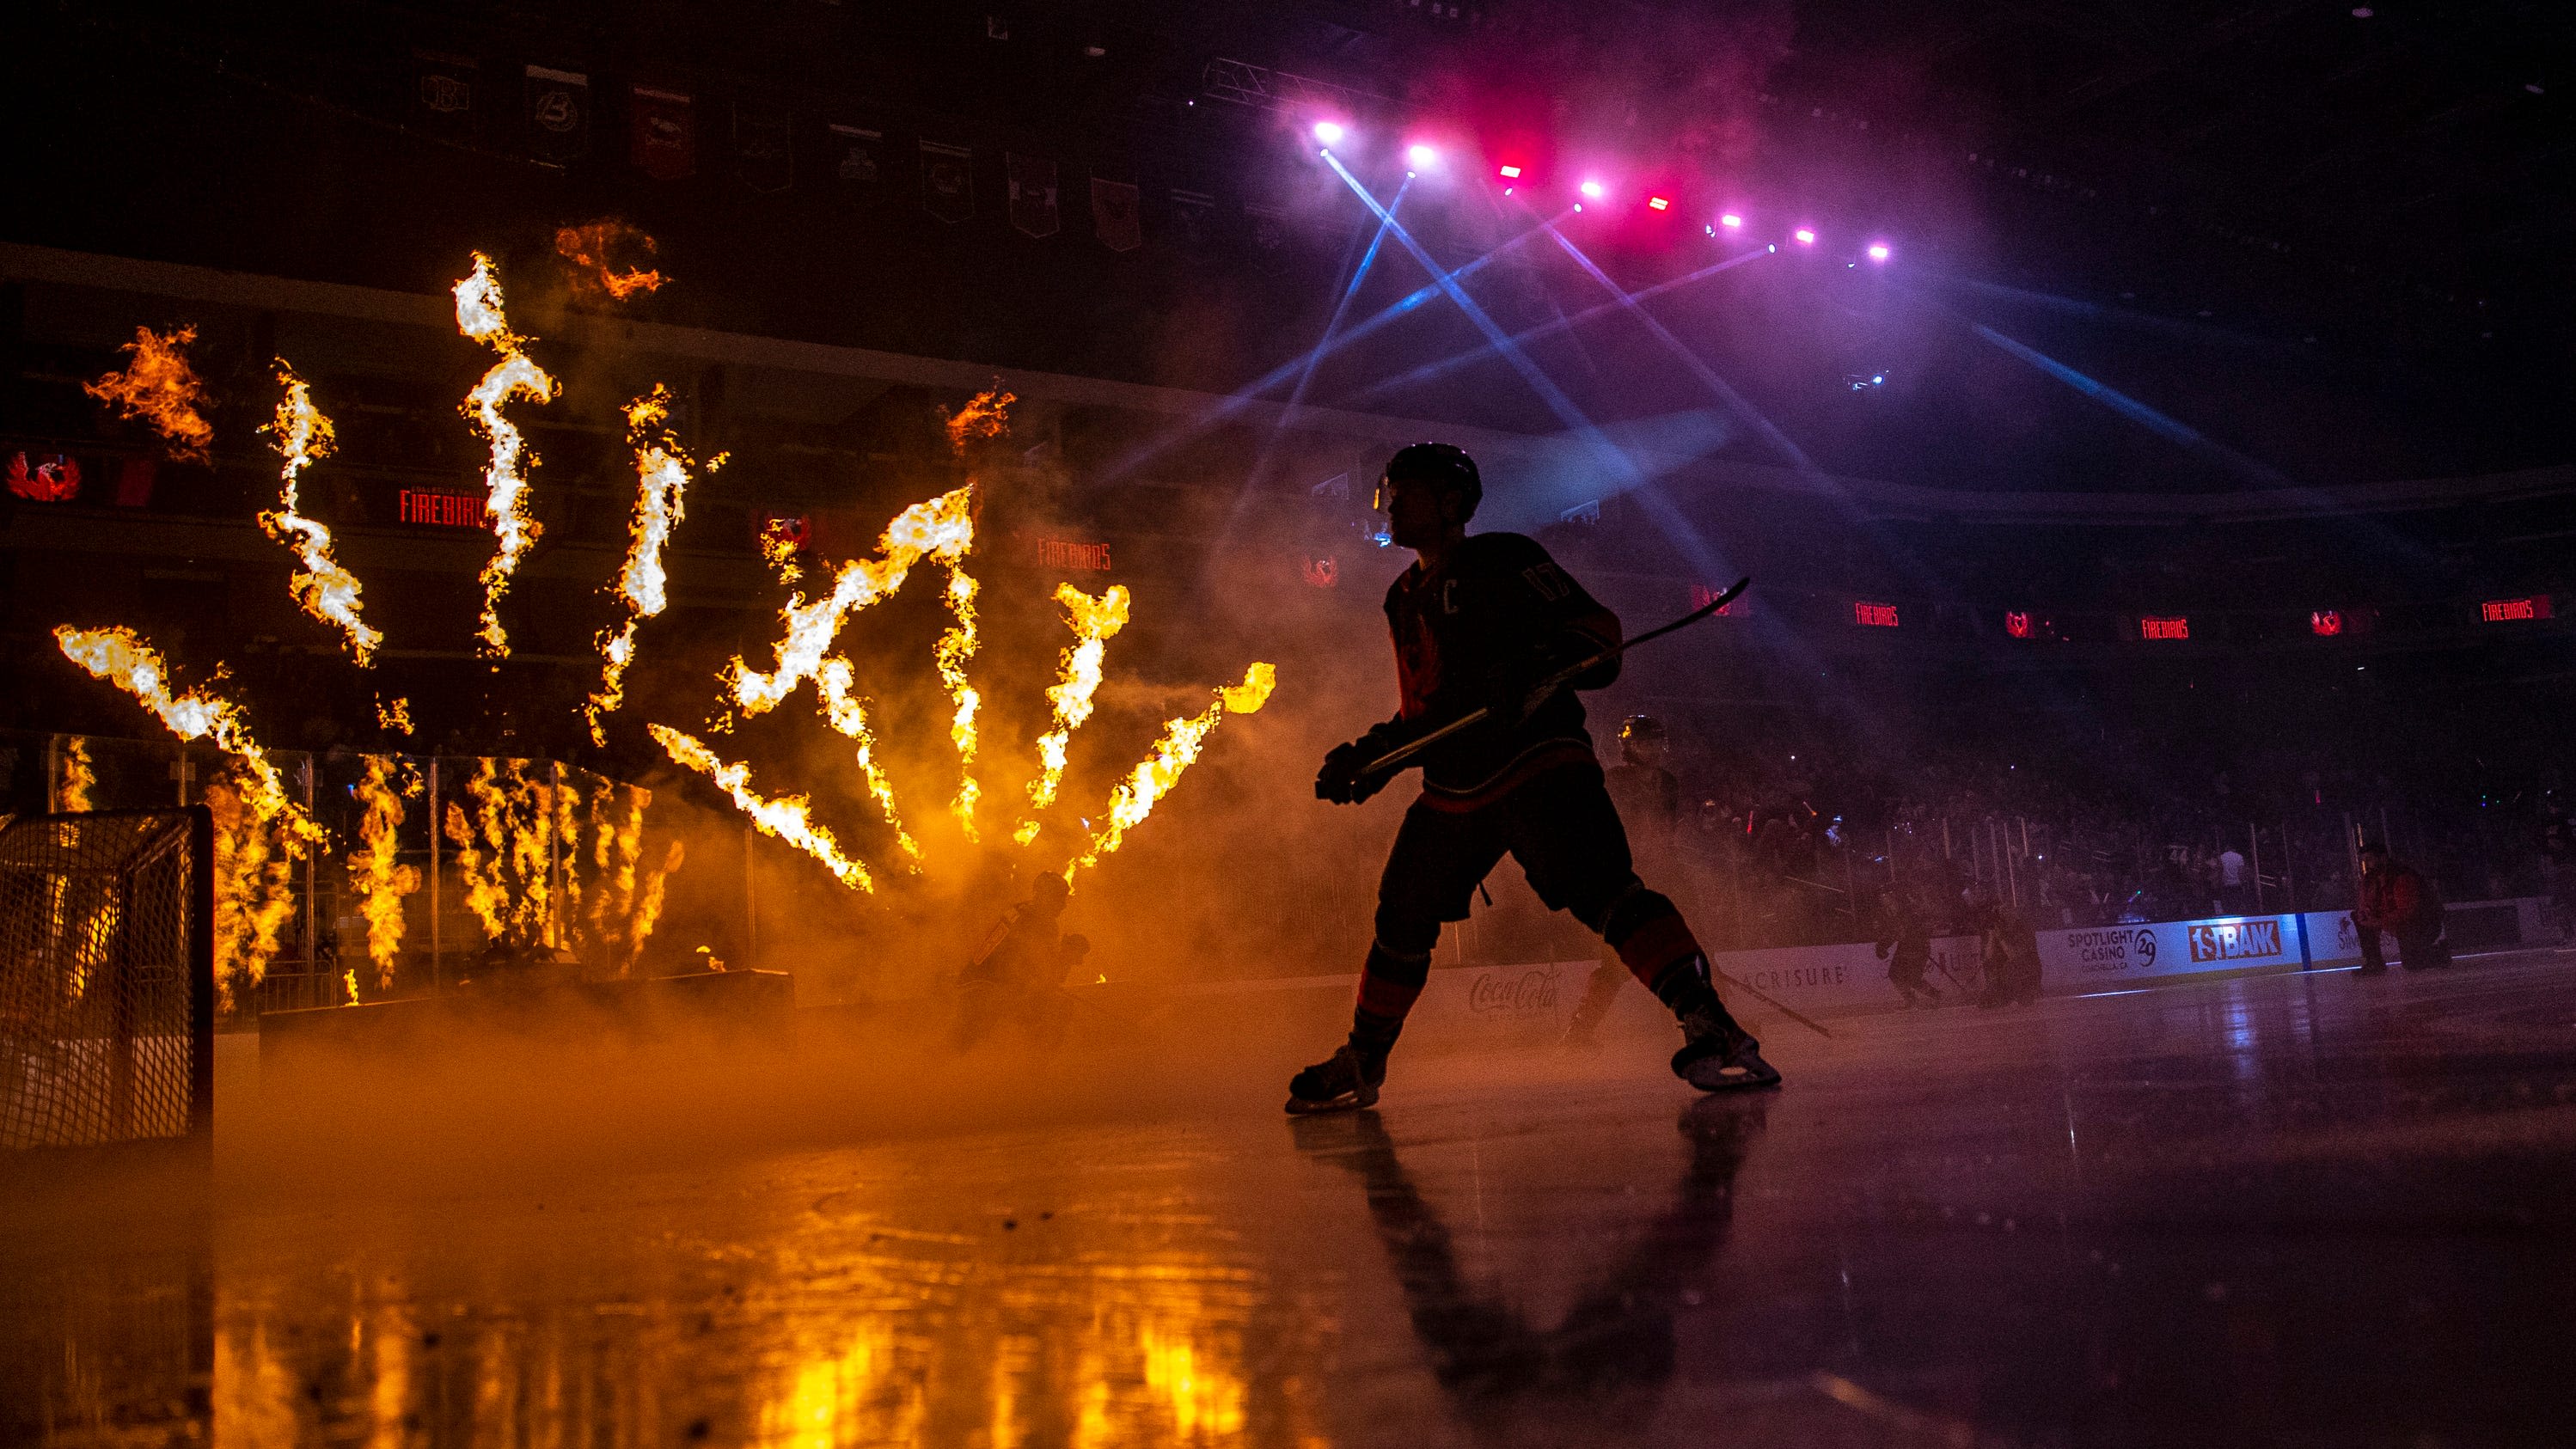 The Firebirds host the Ontario Reign in Game 2 of the Pacific Division Finals